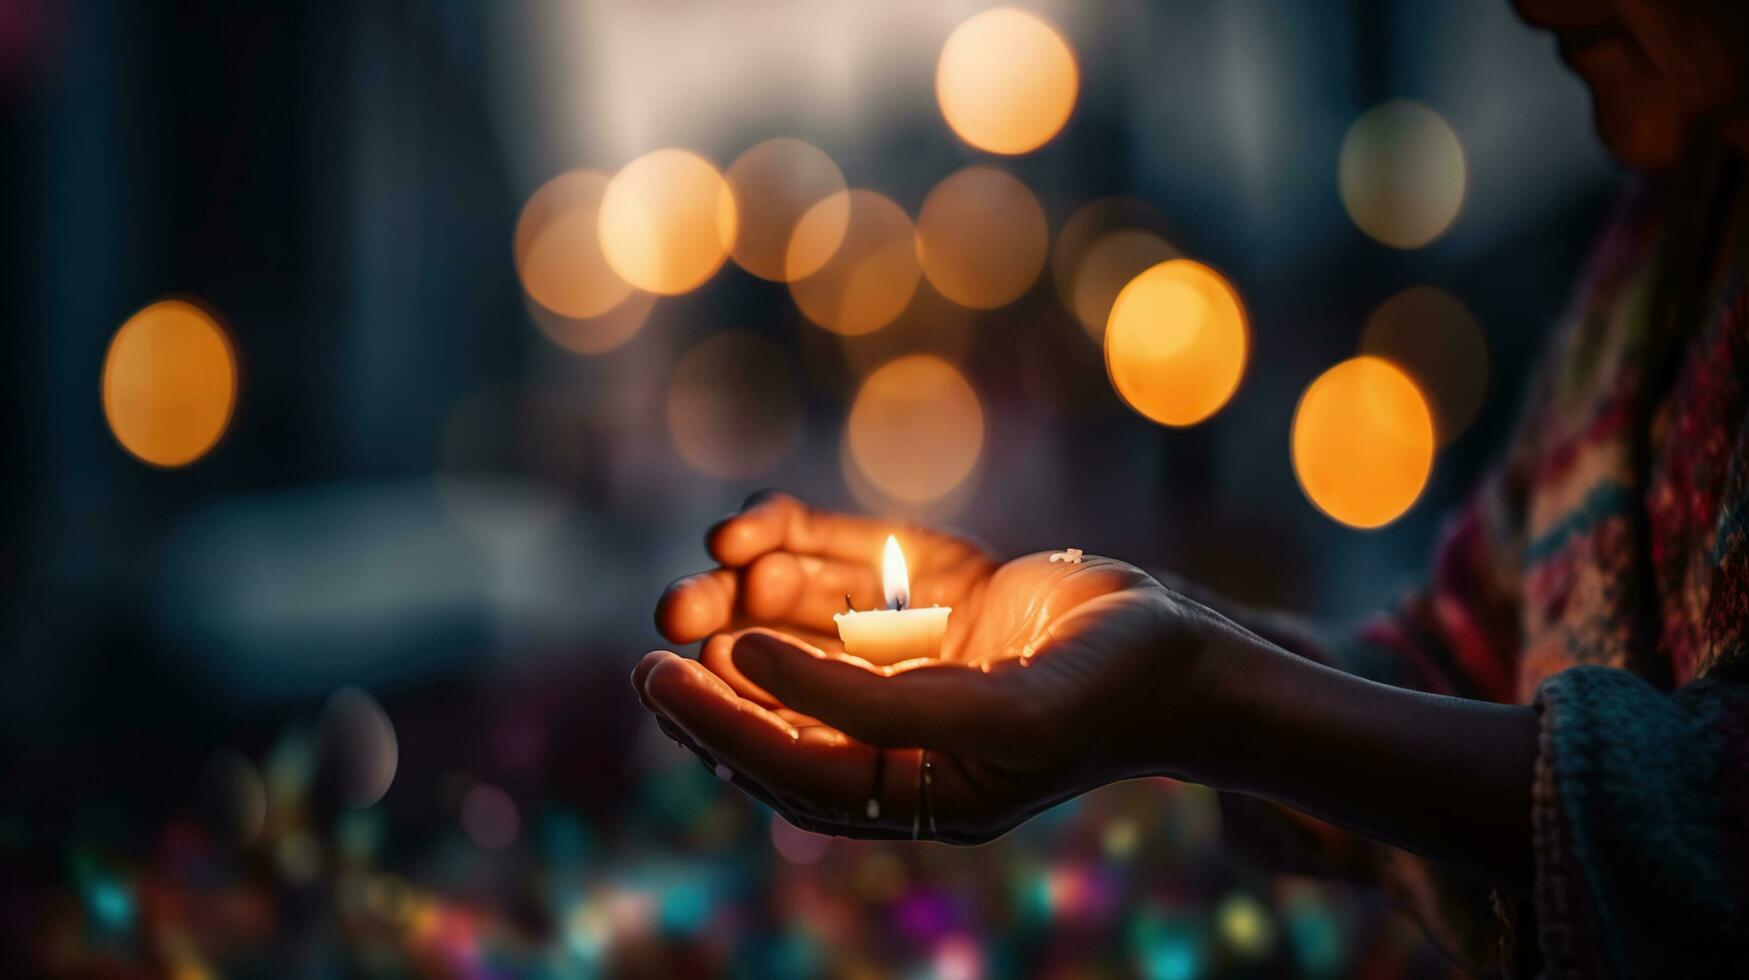 AI generated Hands Holding Candle With Shining Flame And Blurry Lights - Defocused Hope Concept photo